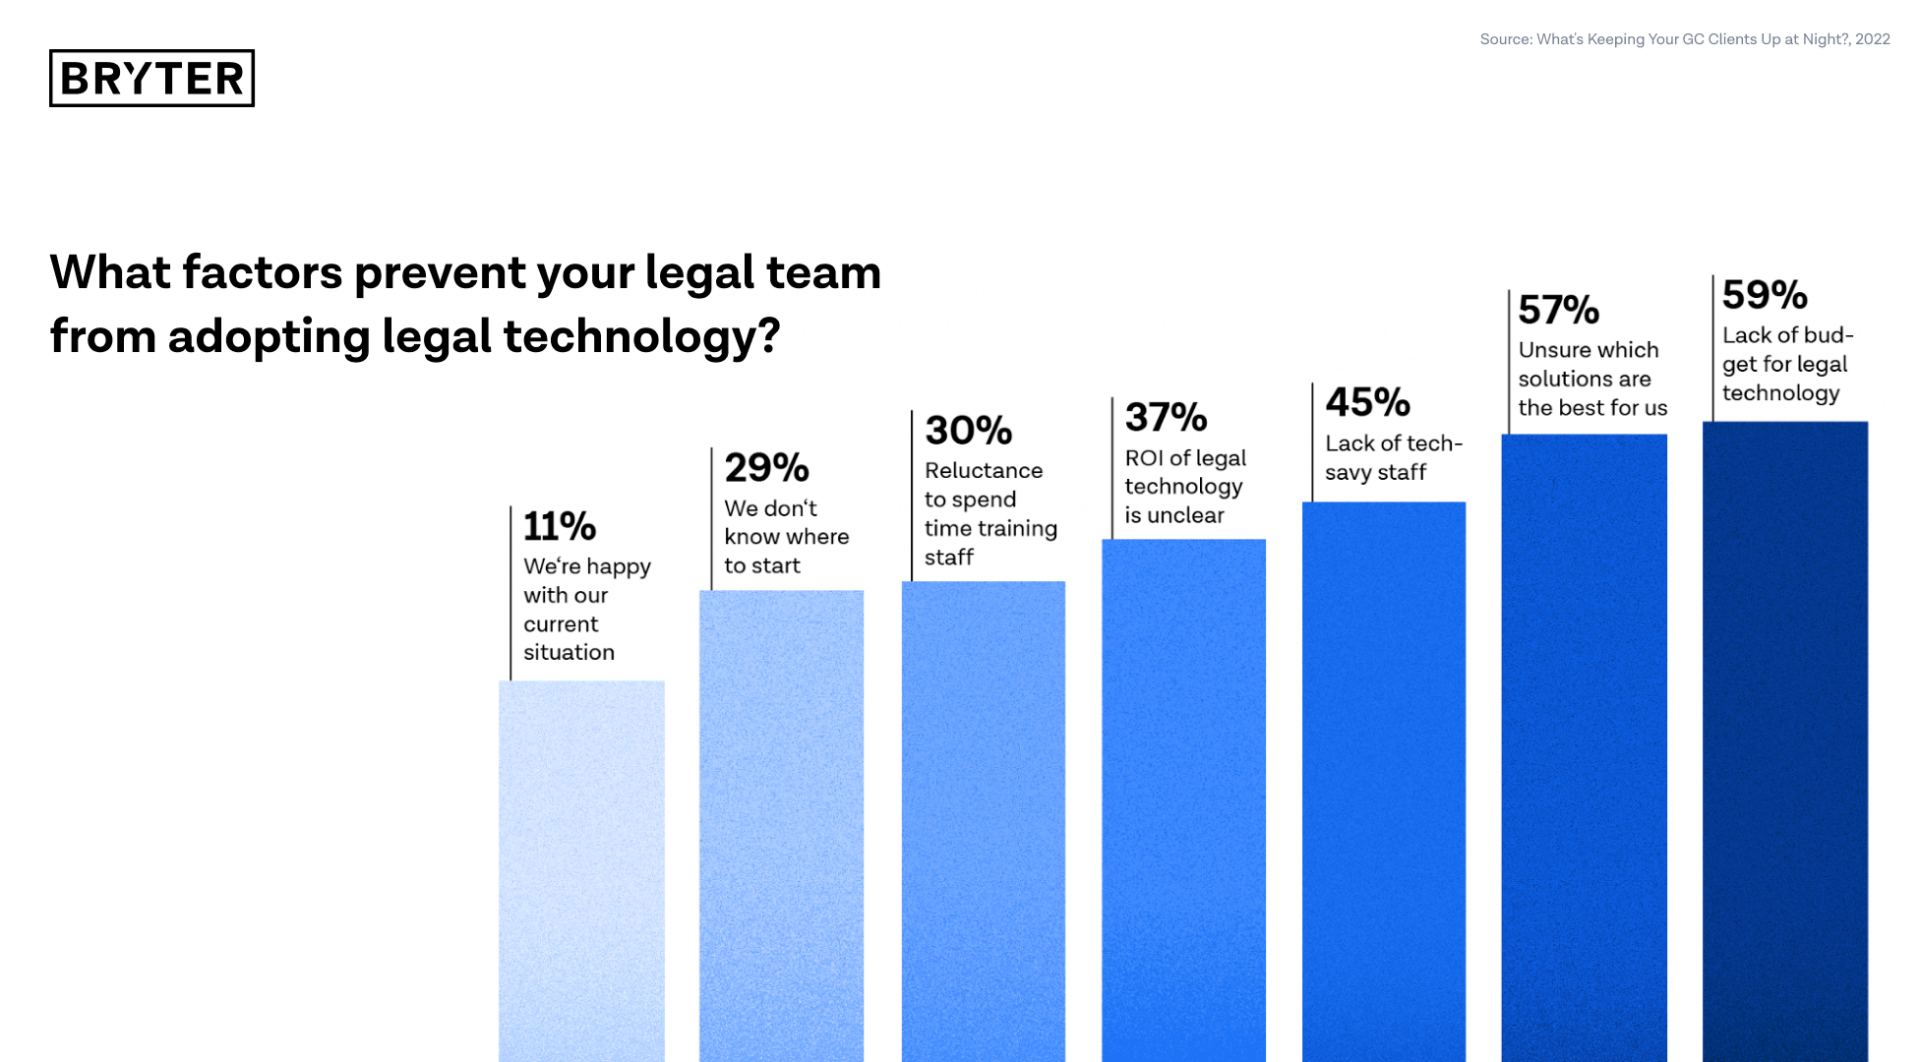 Top factors preventing legal teams from adopting legal technology.